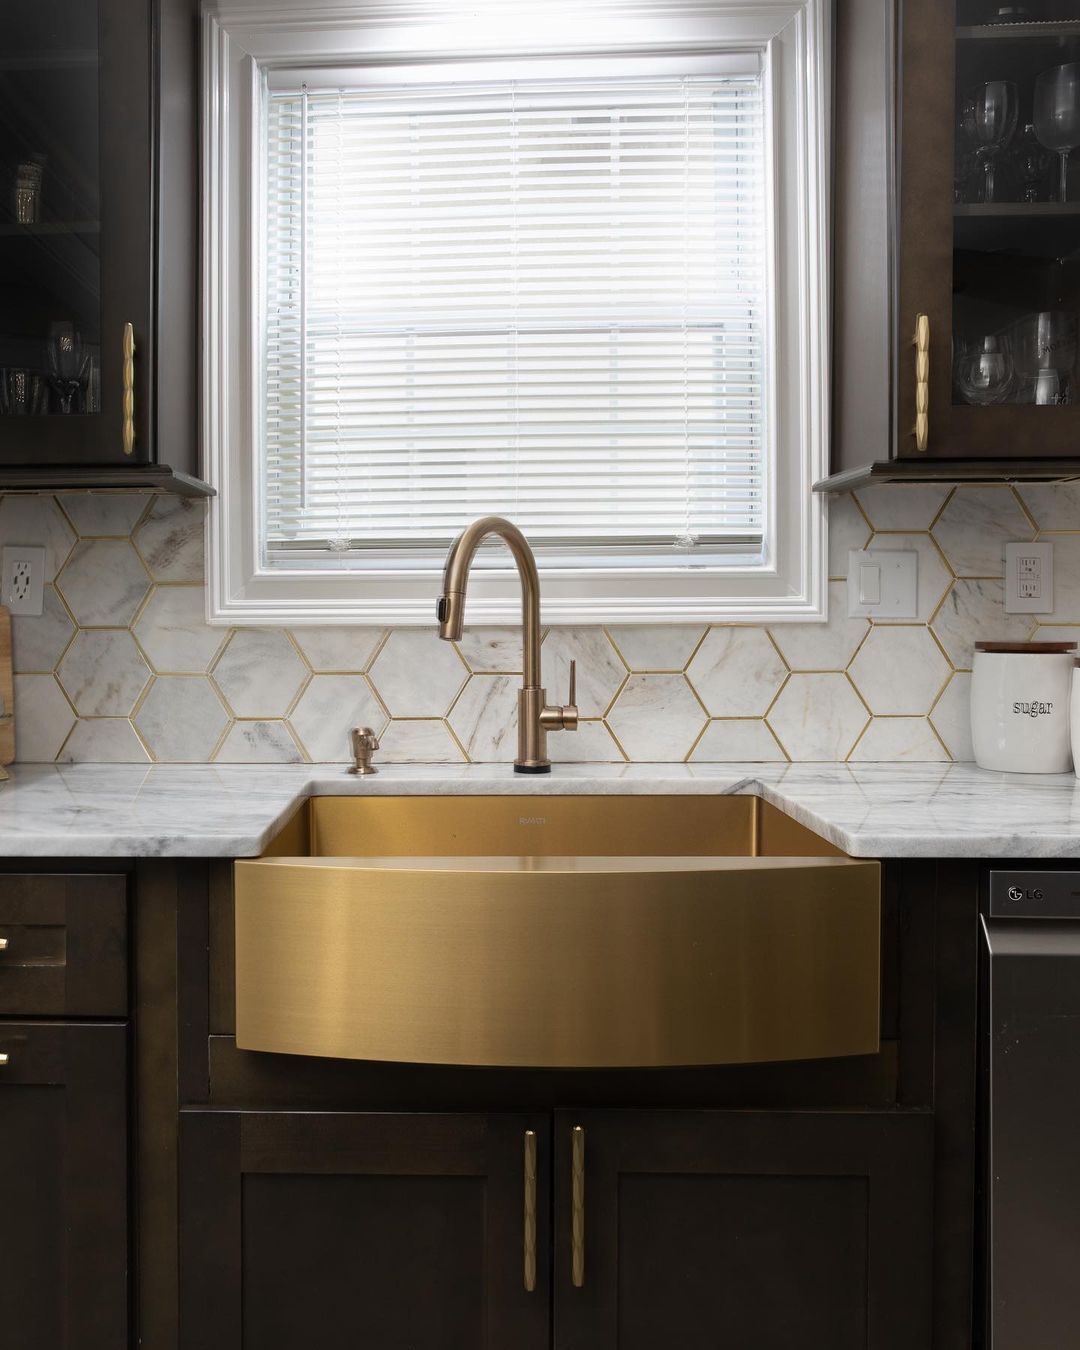 8. Bold Hexagonal Backsplash with Gold and Marble